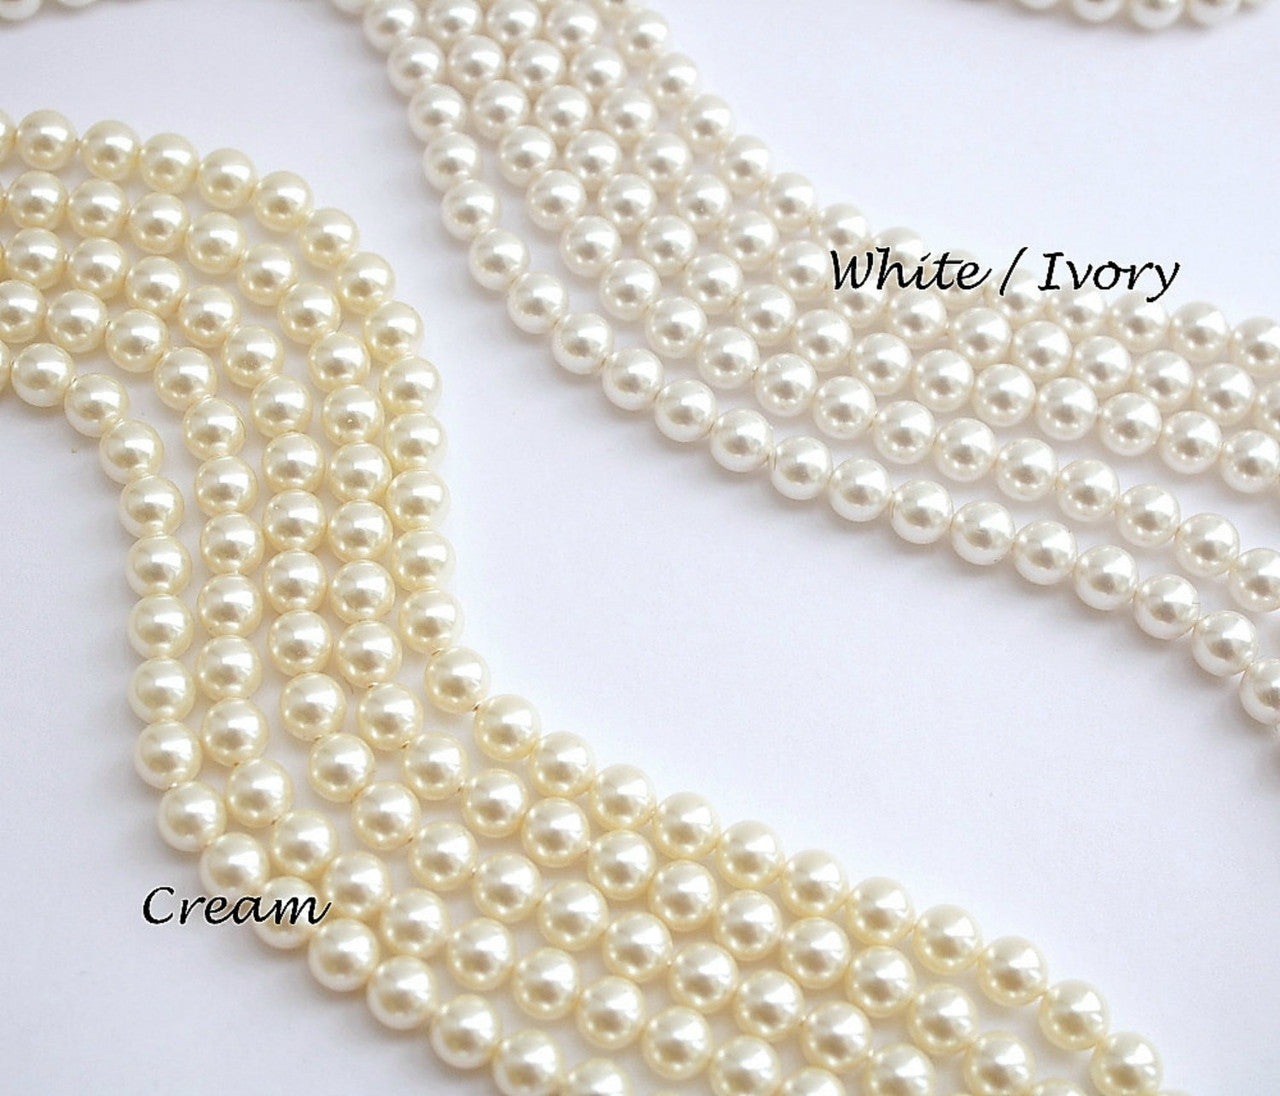 Gold Necklace with Single Pearl- Ava